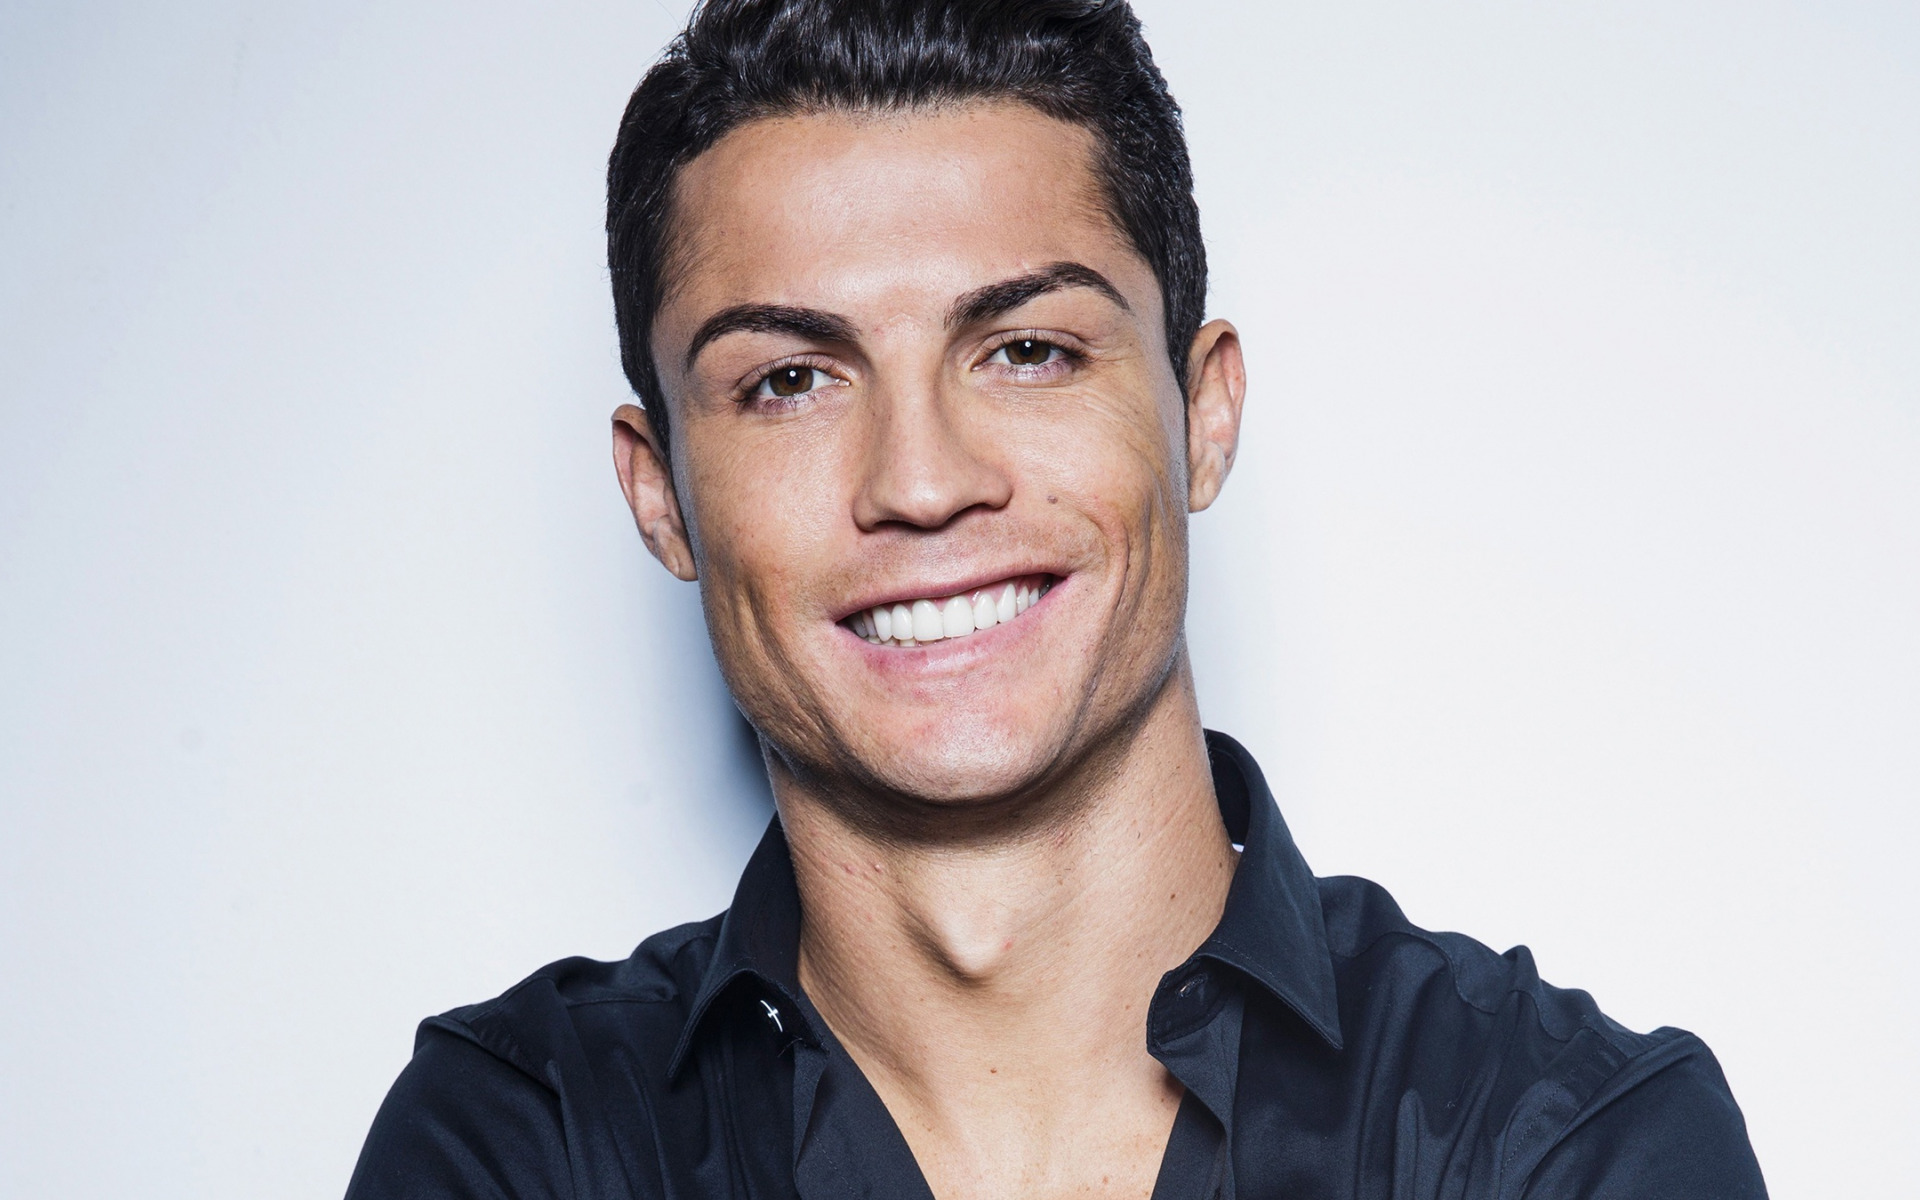 Download wallpaper Cristiano Ronaldo, portrait, photo shoot, portuguese football player, smile, professional football players, football, CR Ronaldo for desktop with resolution 1920x1200. High Quality HD picture wallpaper